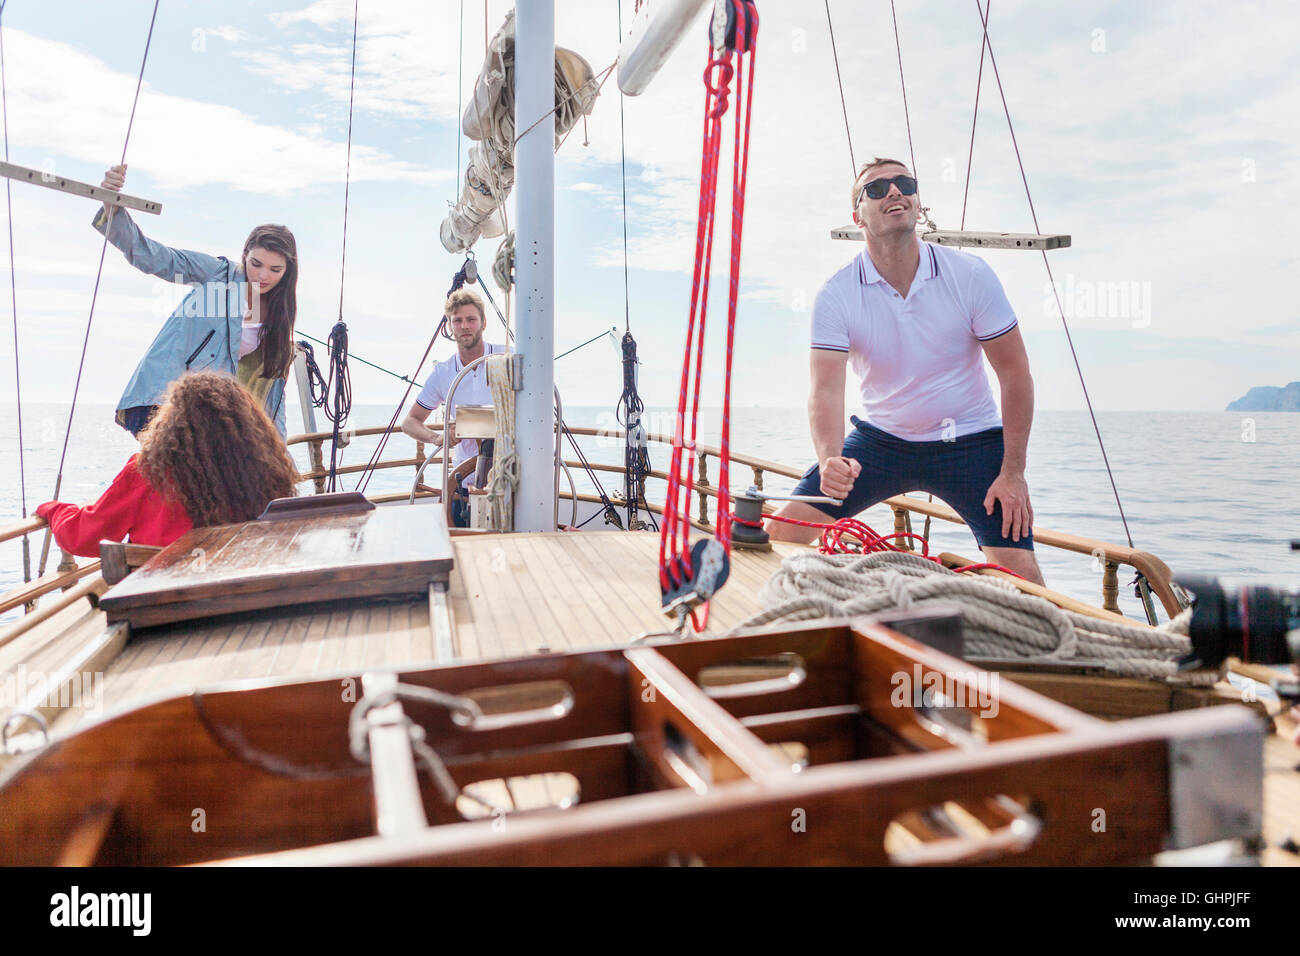 Group of friends on a sailing boat Stock Photo